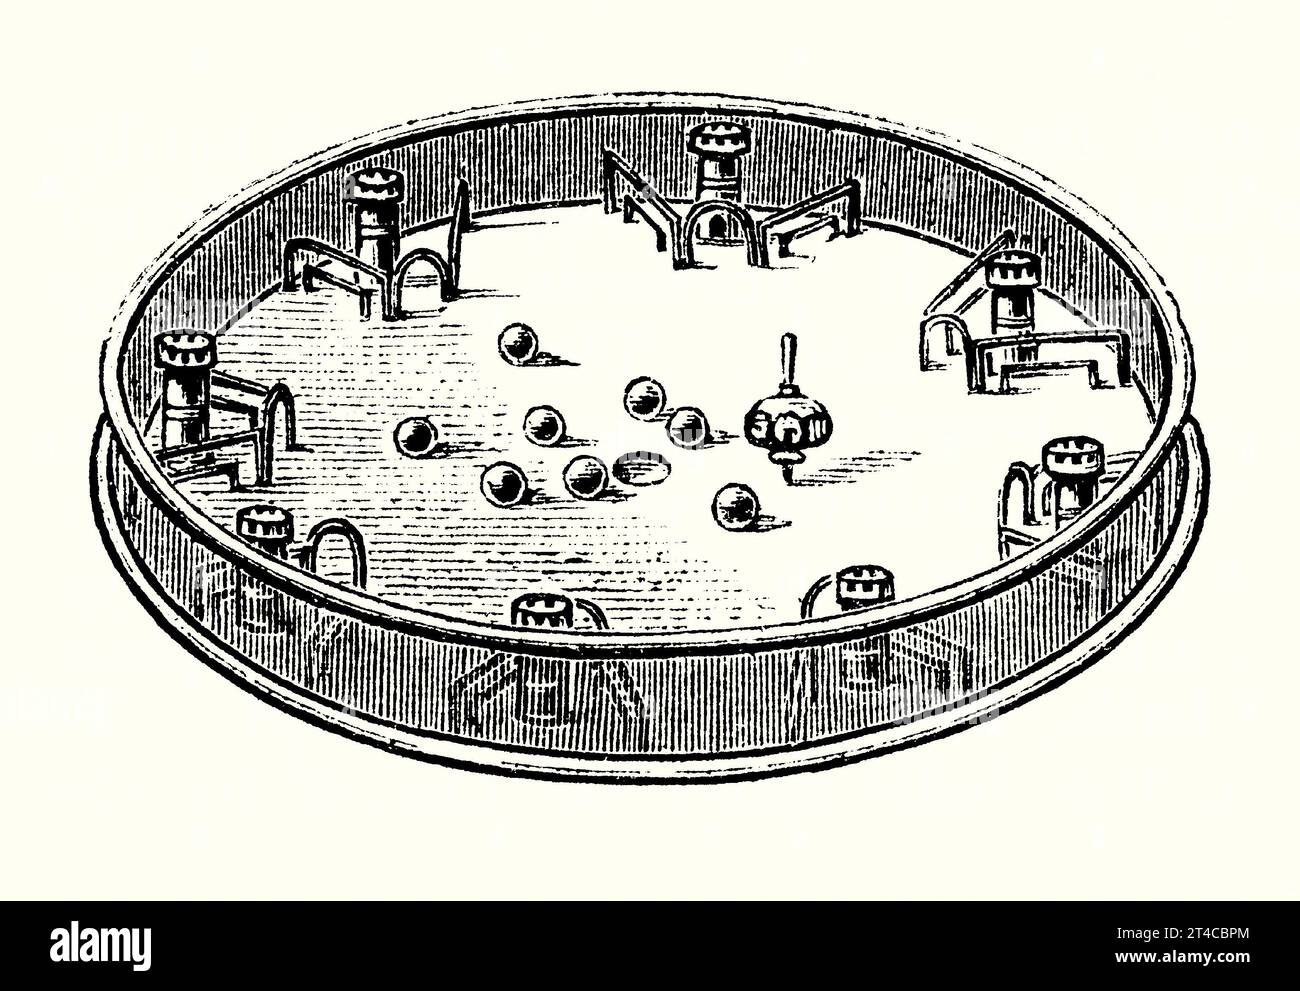 An old engraving of the game of Cannonade or Castle bagatelle. It is from Victorian book of the 1890s on sports, games and pastimes. It comprising a circular wooden board, about 40cms in diameter, with a metal mesh outer ‘fence’. Around the board were eight castles or ‘stations’ (often made of turned ivory) within wire frames. The board also housed a spinning top or ‘teetotem’ and eight clay or ivory balls. Each player in turn would vigorously spin the top, which would then hit and scatter the balls. The aim was to get as many balls as possible housed in their opponents’ perimeter castles. Stock Photo